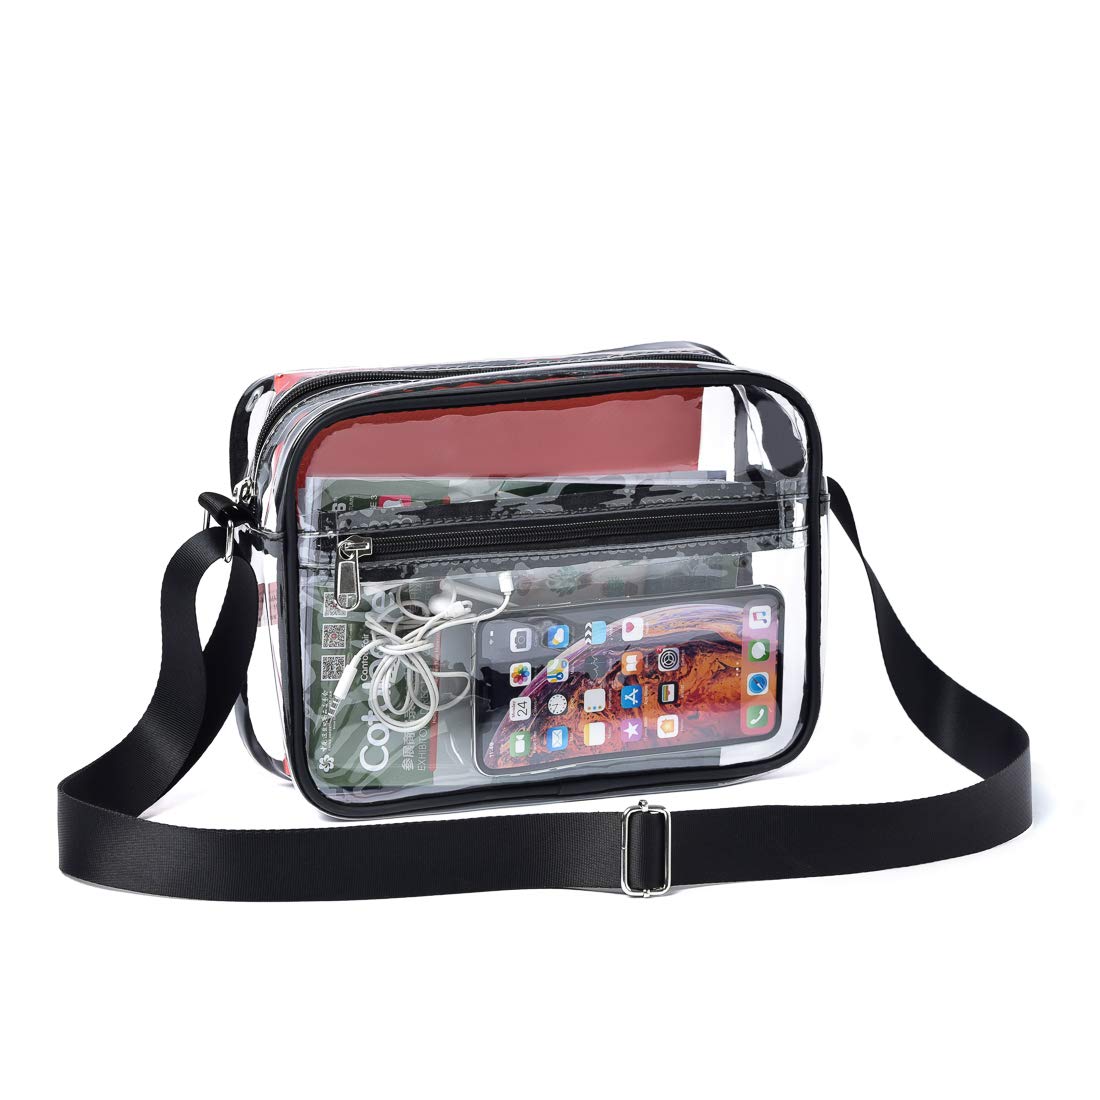 Where Can I Buy A Clear Crossbody Bag For Stadium? –